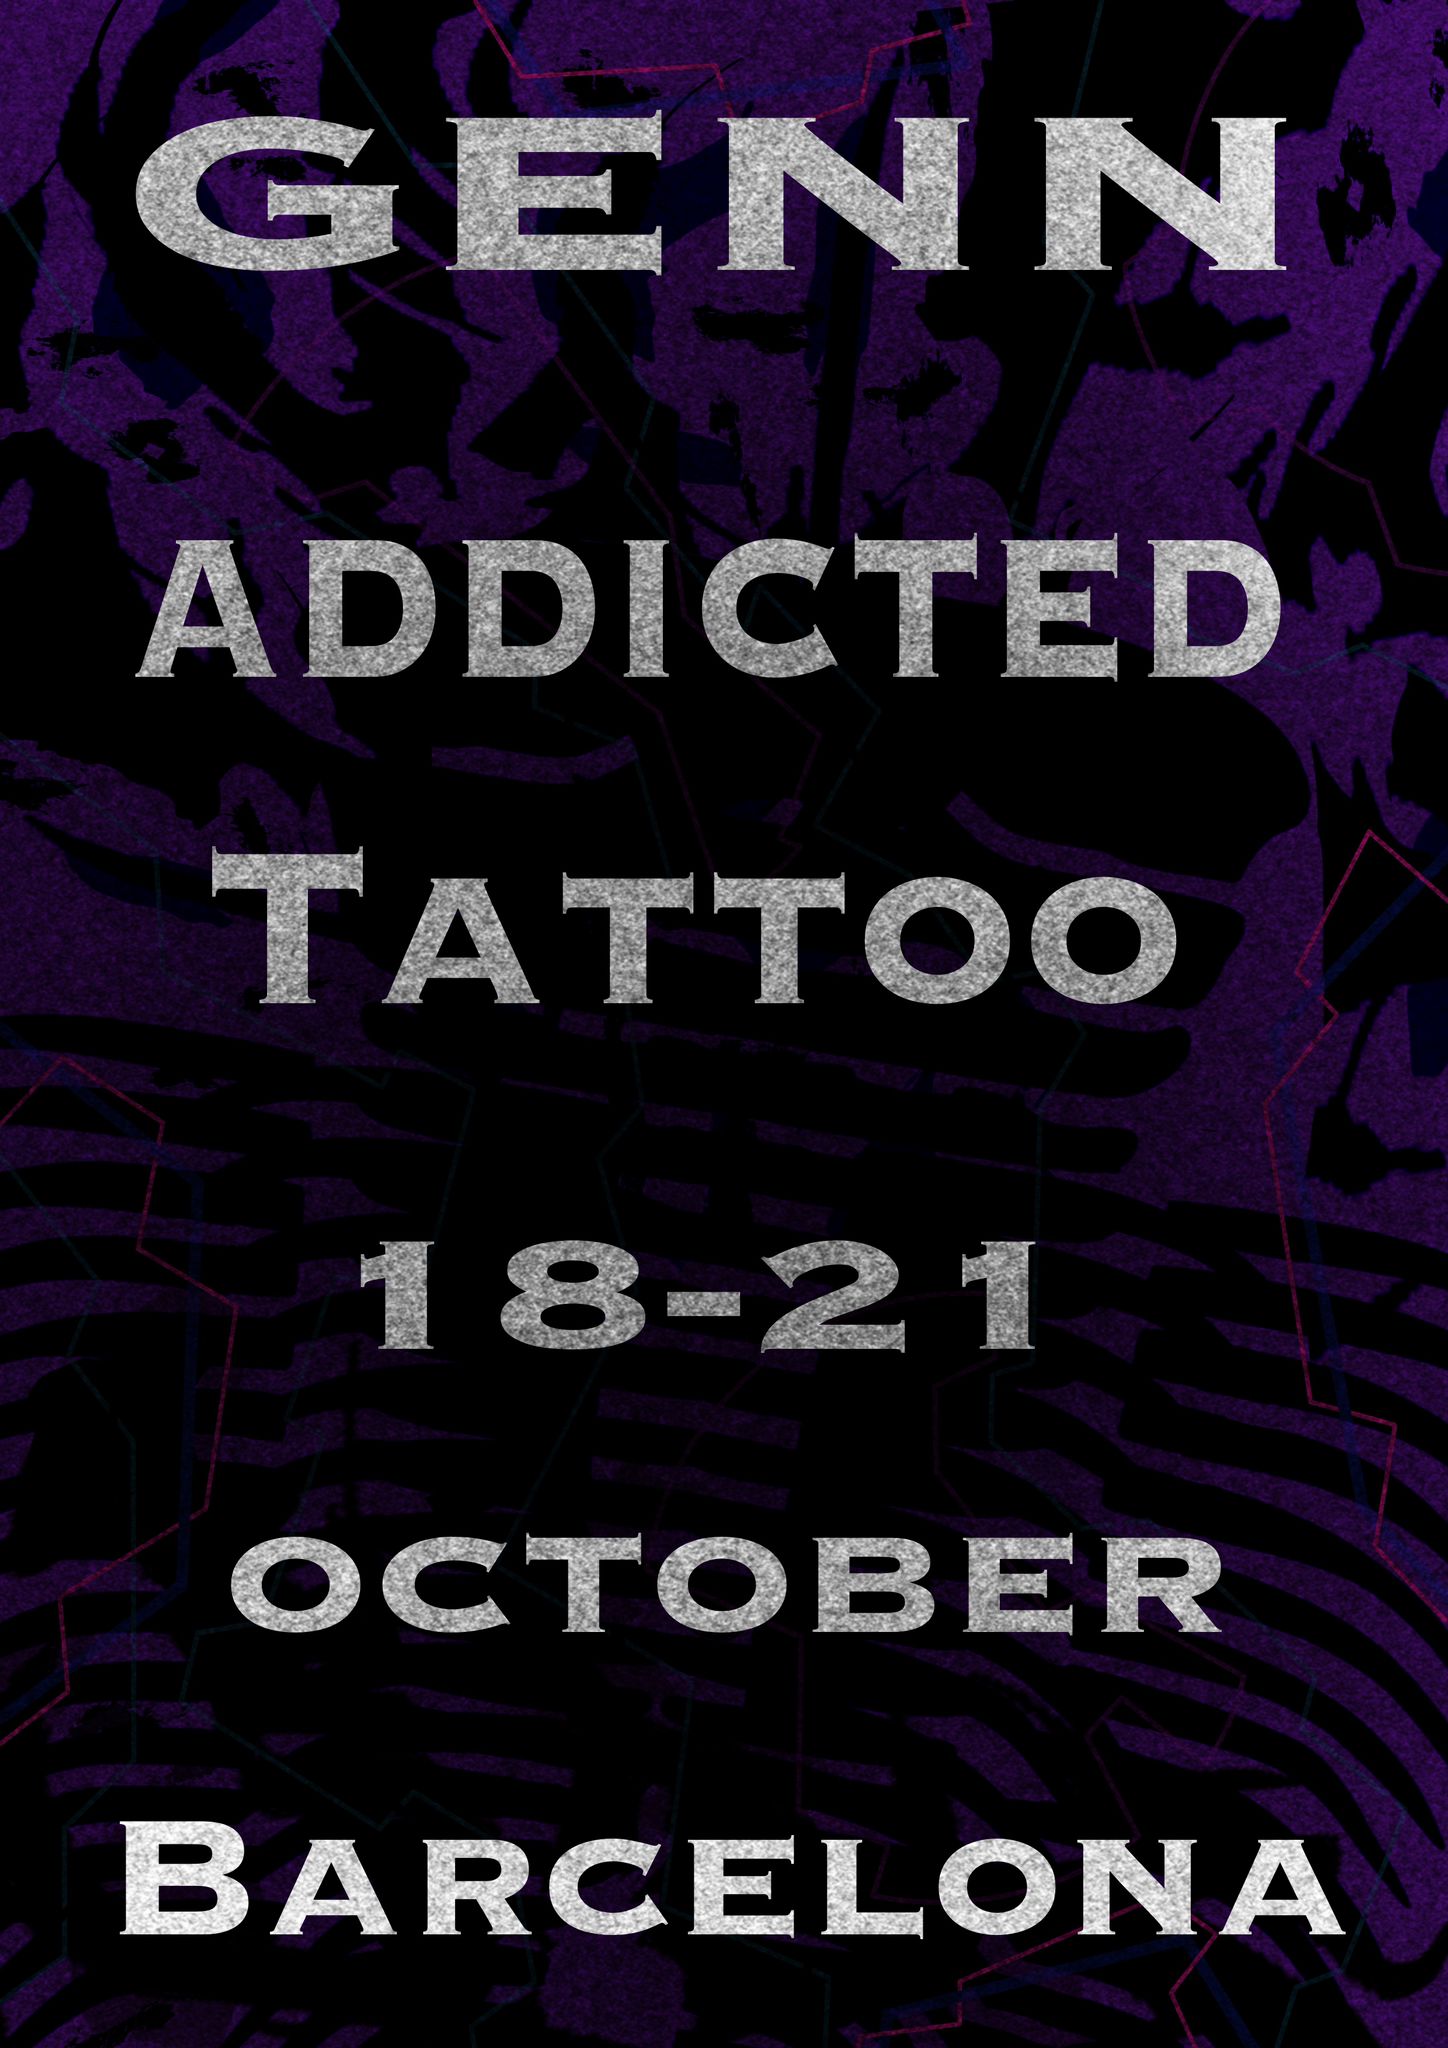 genn_one will be at Addicted